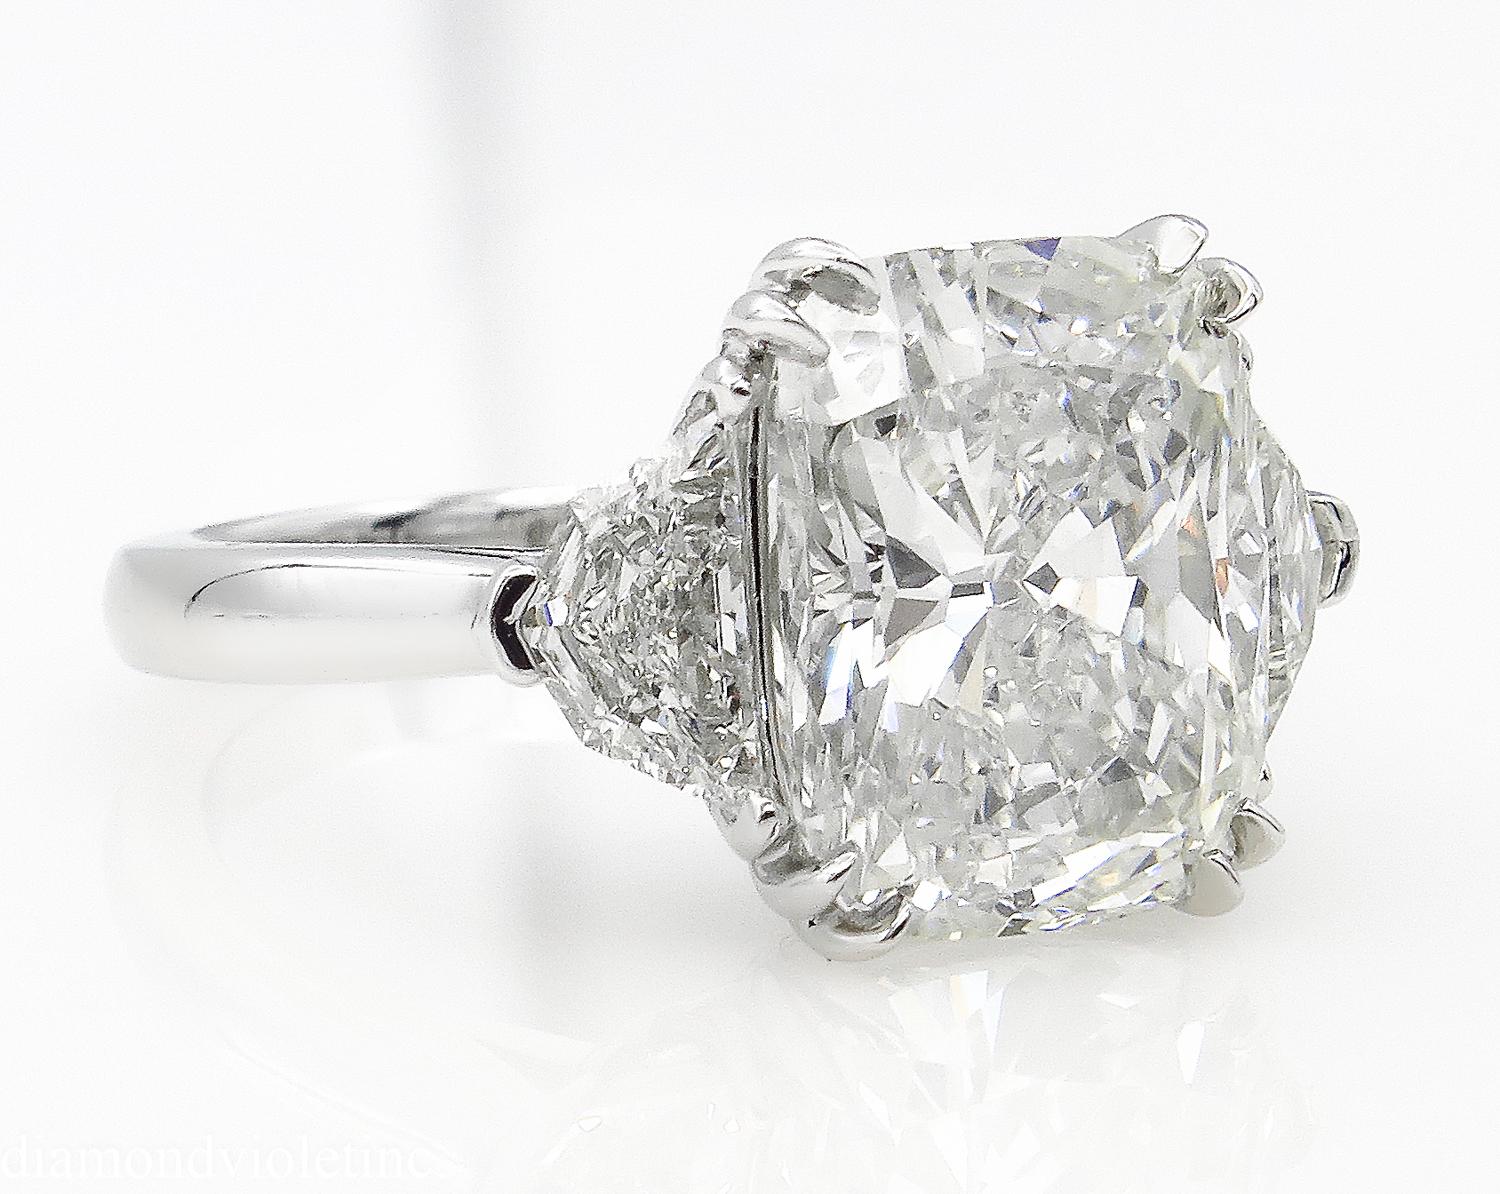 A Breathtaking Estate HANDMADE PLATINUM (stamped) Cushion Diamond Three-Stone Engagement ring. The Prong Set Radiant Diamond is 5.02CT with measurements of 11.58x9.20x6.08mm. GIA Certified as K color and I1 clarity (Eye Clean).
It is set with 2